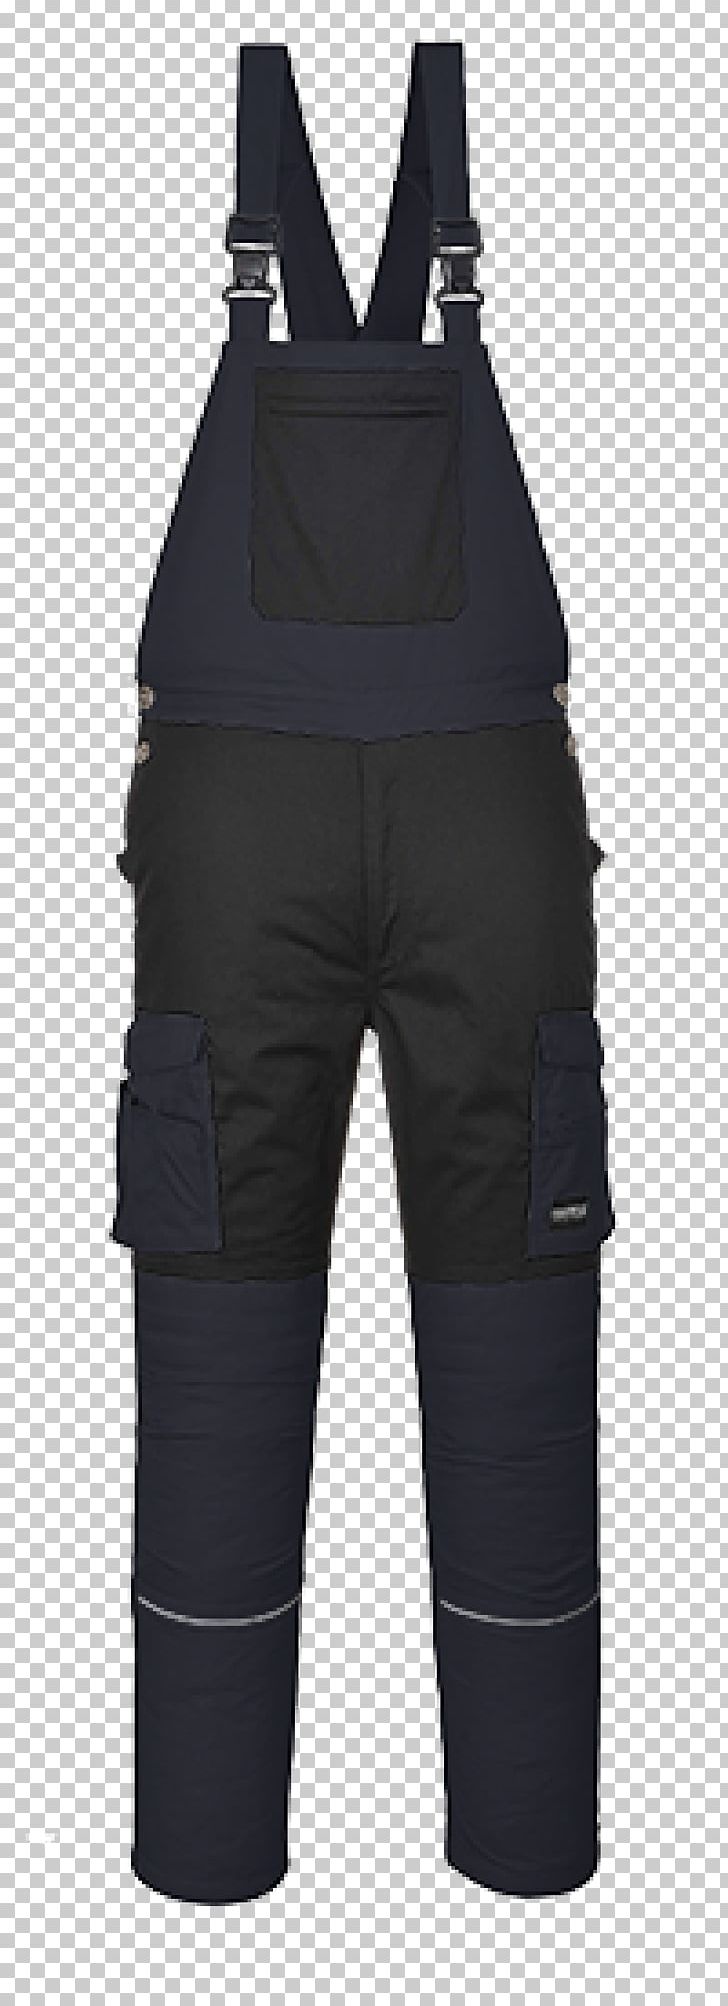 Overall Hockey Protective Pants & Ski Shorts Portwest Braces PNG, Clipart, 3 Xl, Best Bib And Tucker, Bib, Brace, Braces Free PNG Download